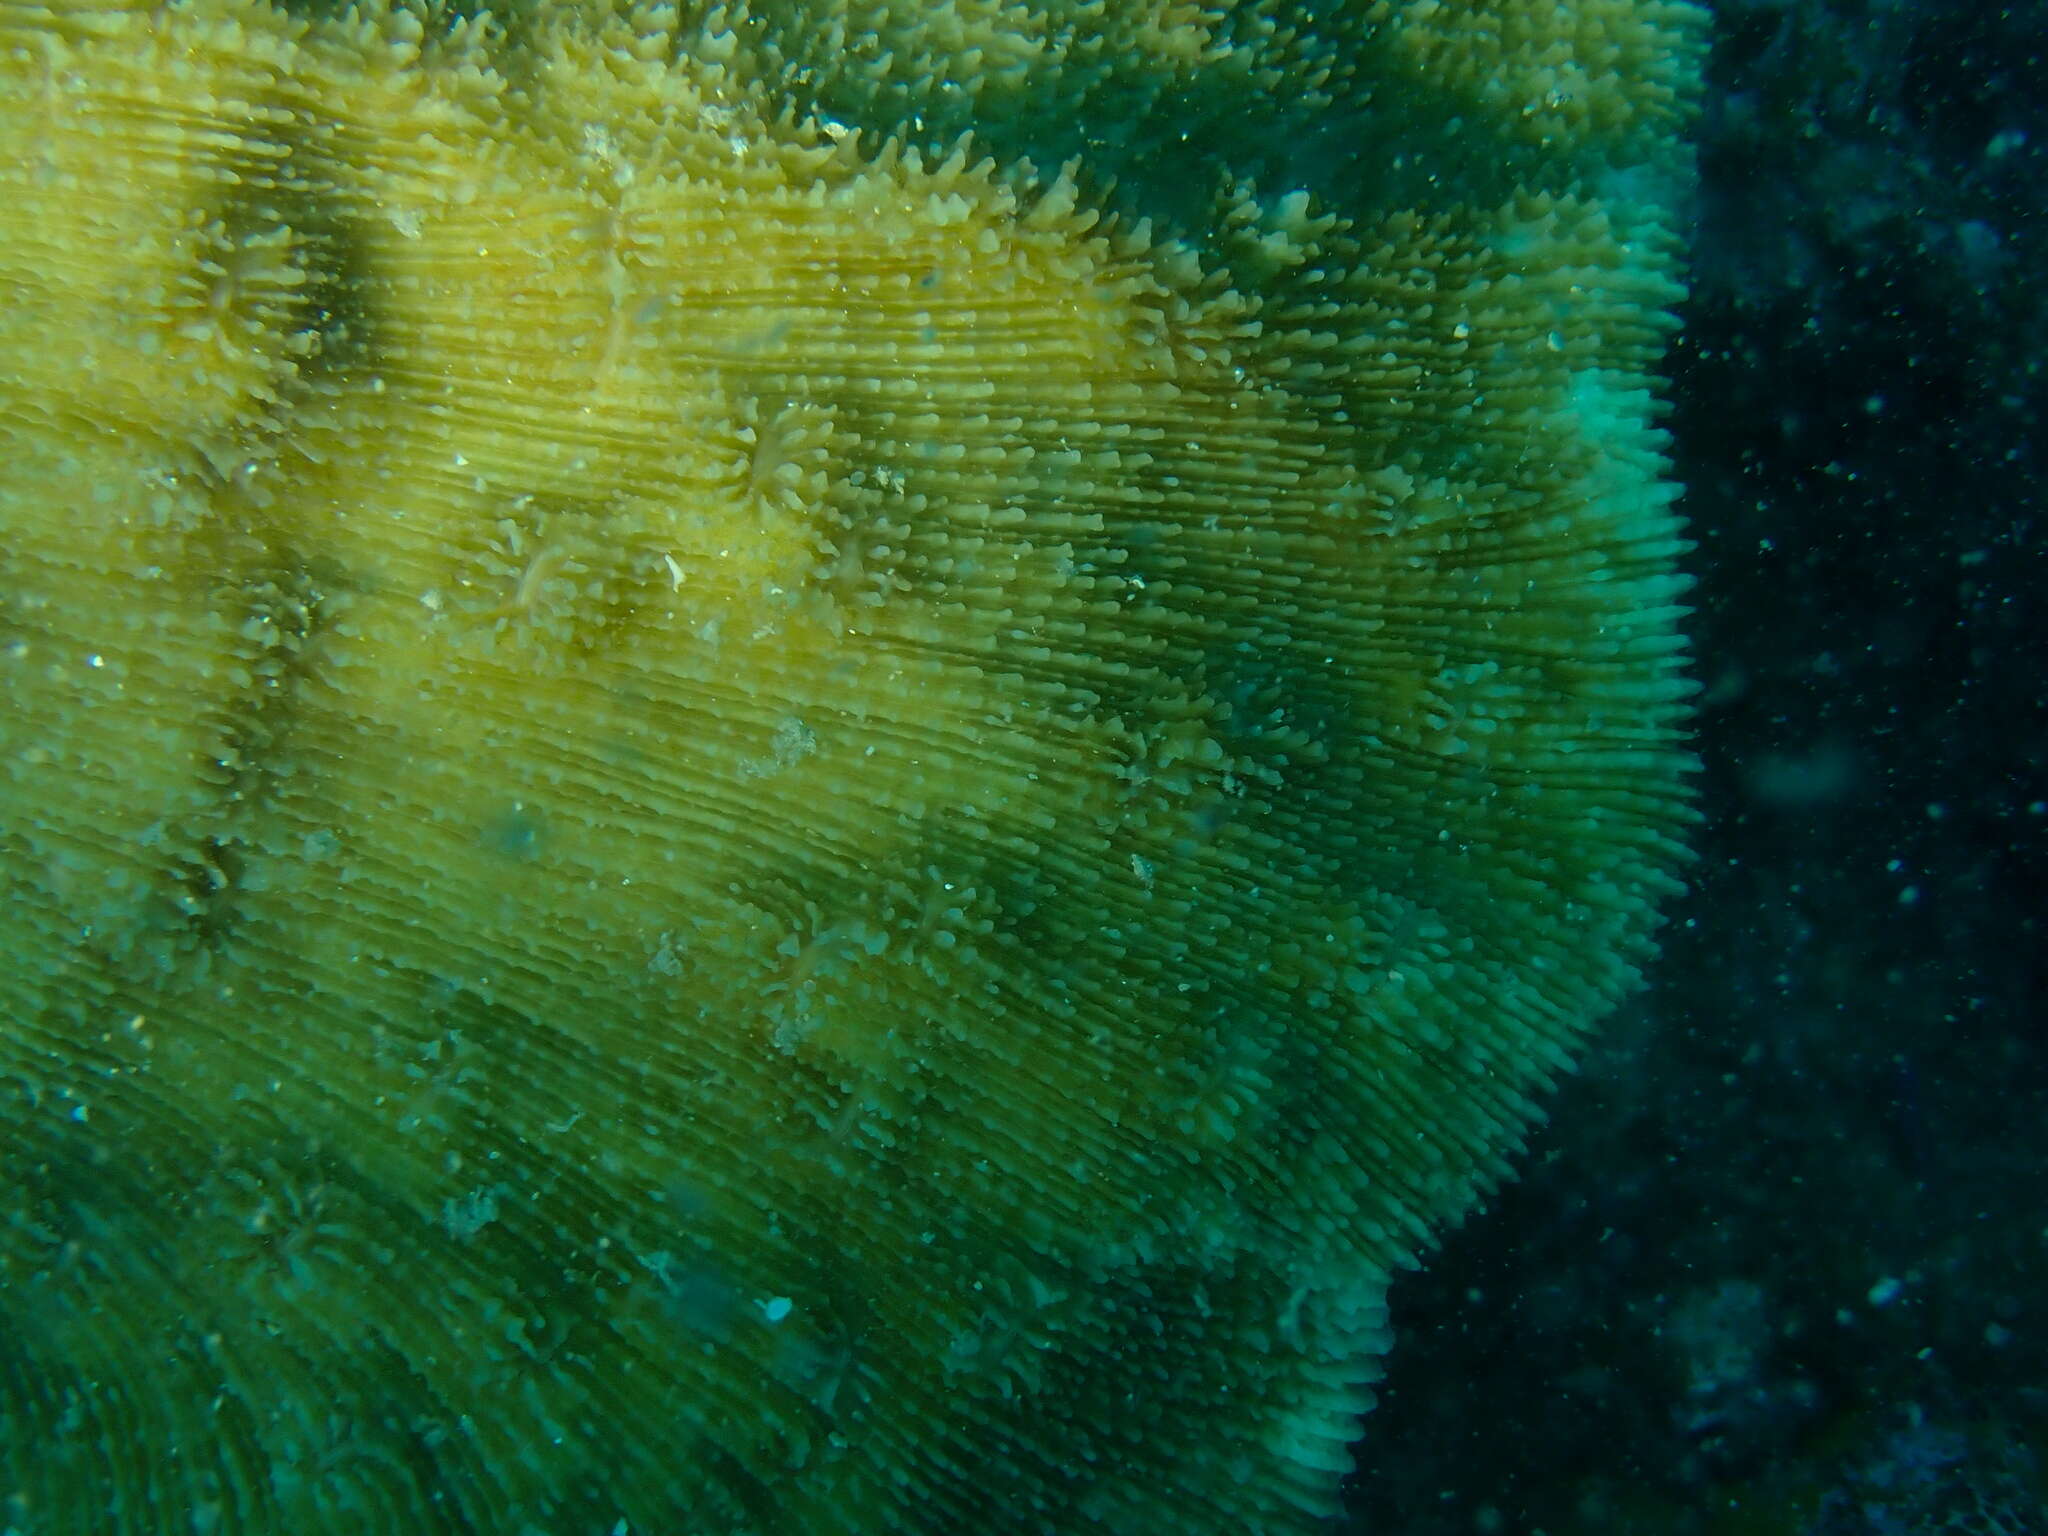 Image of Bowl Coral